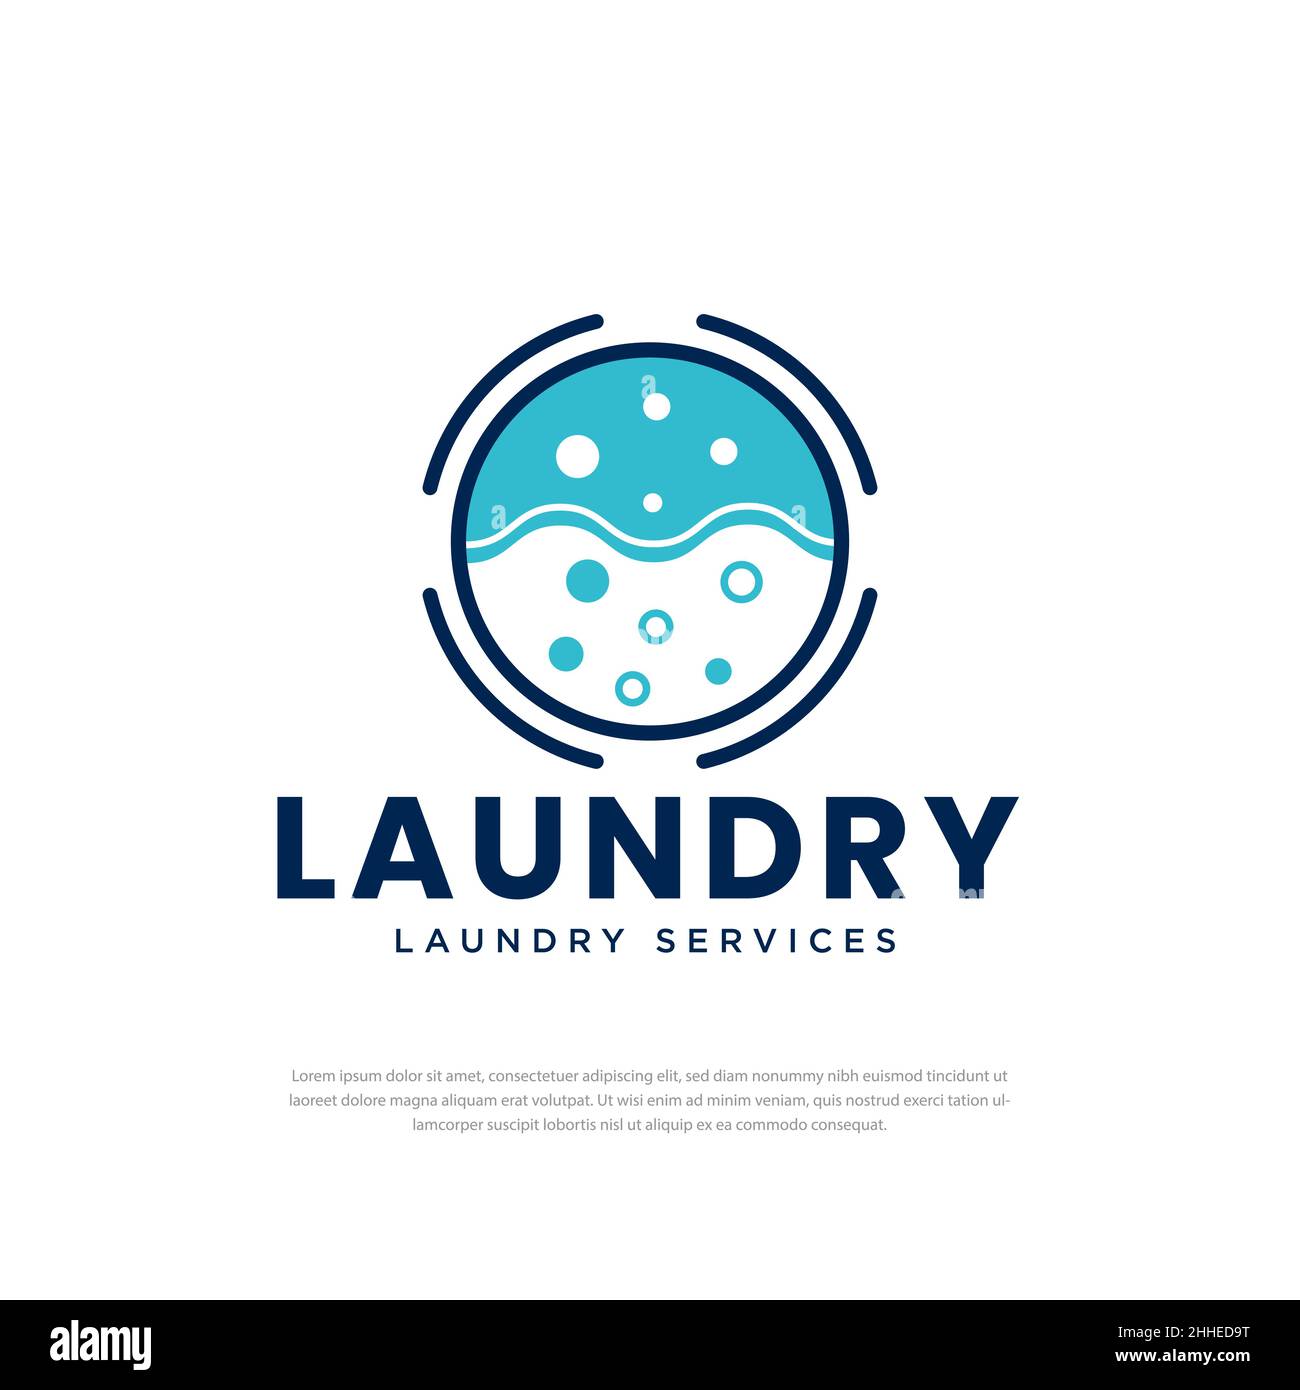 Laundry and dry cleaning icon logo design with bubbles for washing business clothes cleaning modern template Stock Vector